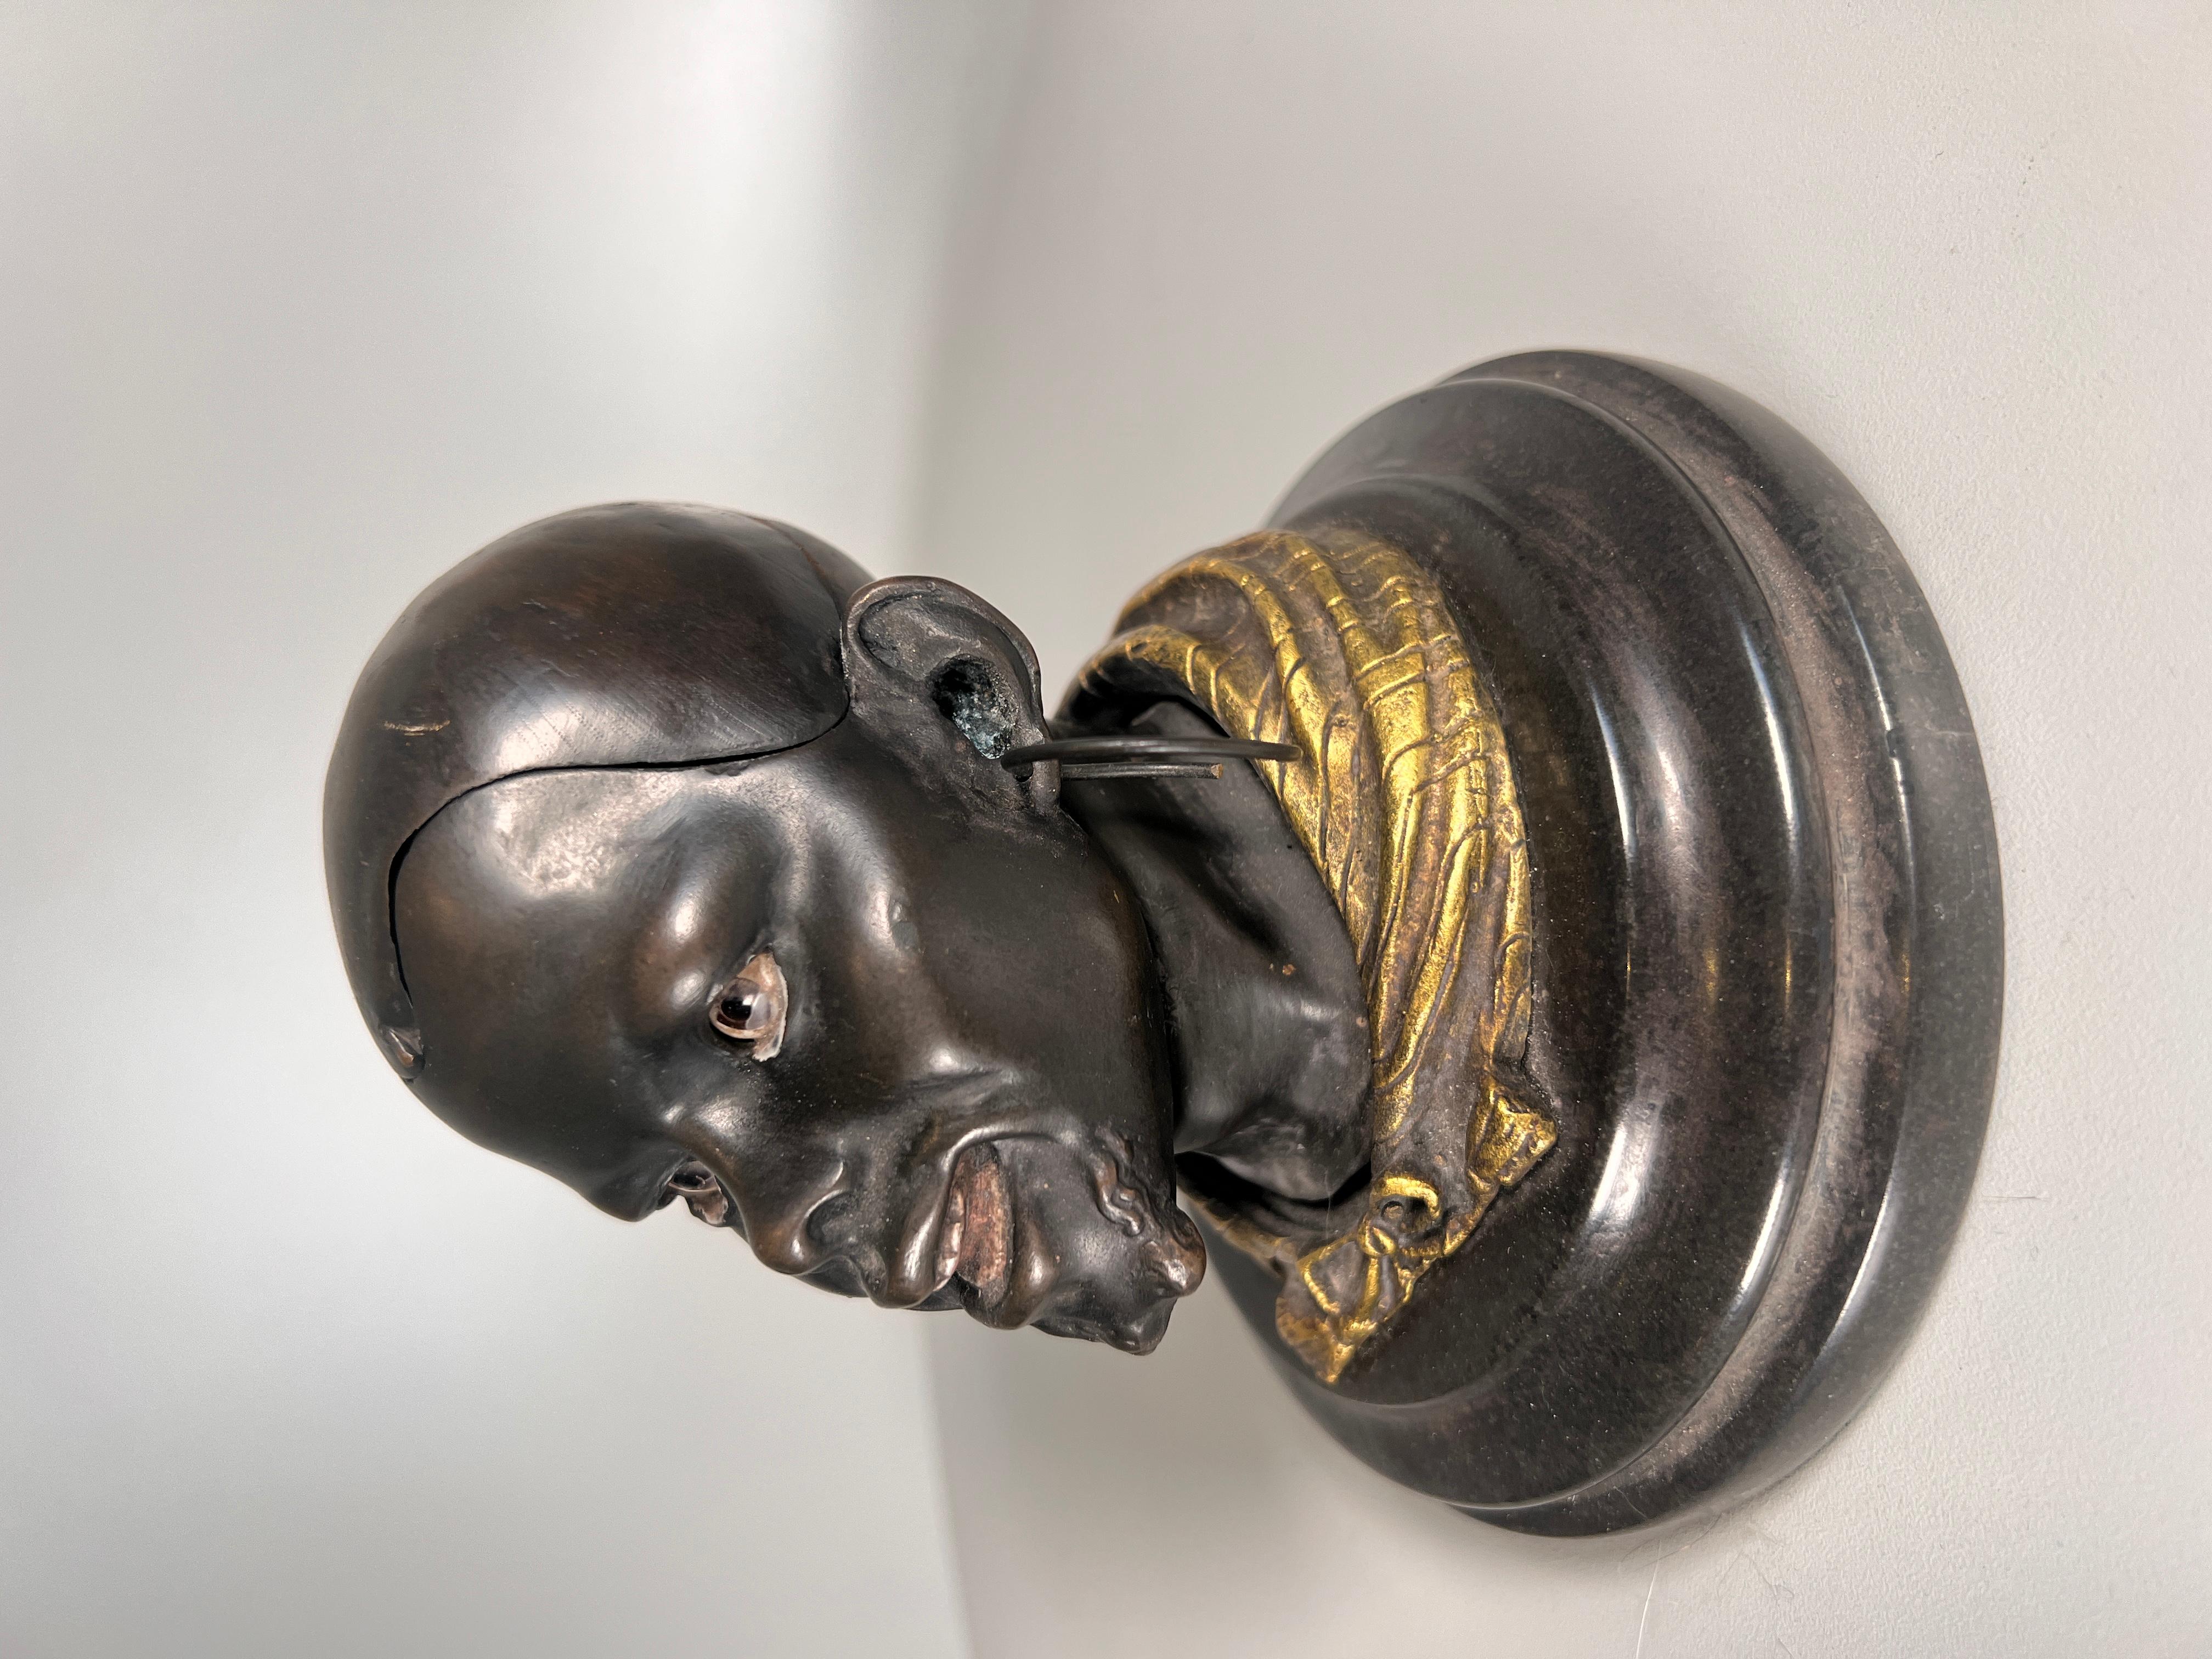 A Wonderfull quality bronze inkwell depicting a black African man, made by the goldscheider factory in Vienna around 1890, with inset glass eyes.